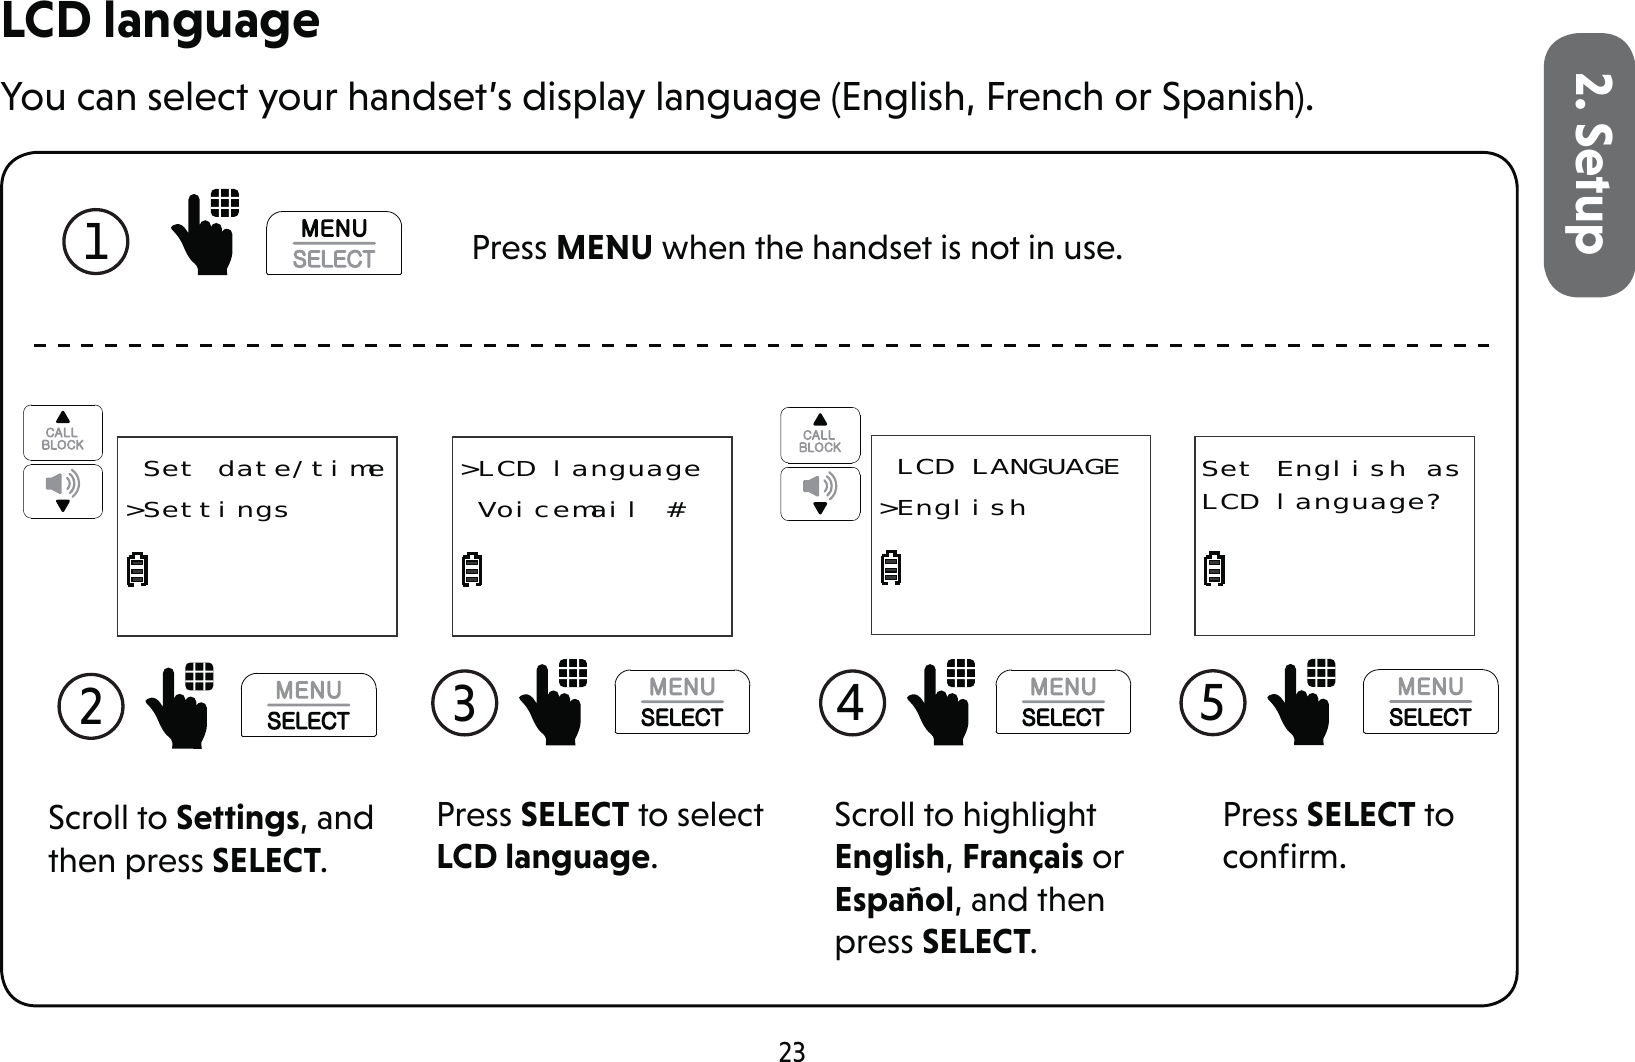 232. SetupLCD languageYou can select your handset’s display language (English, French or Spanish).1  Press MENU when the handset is not in use.Scroll to Settings, and then press SELECT.2  Set date/time&gt;SettingsPress SELECT to select LCD language.3 &gt;LCD language Voicemail #Scroll to highlight English, Français or Español, and then press SELECT.4  LCD LANGUAGE&gt;EnglishPress SELECT to conﬁrm.5 Set English as LCD language?